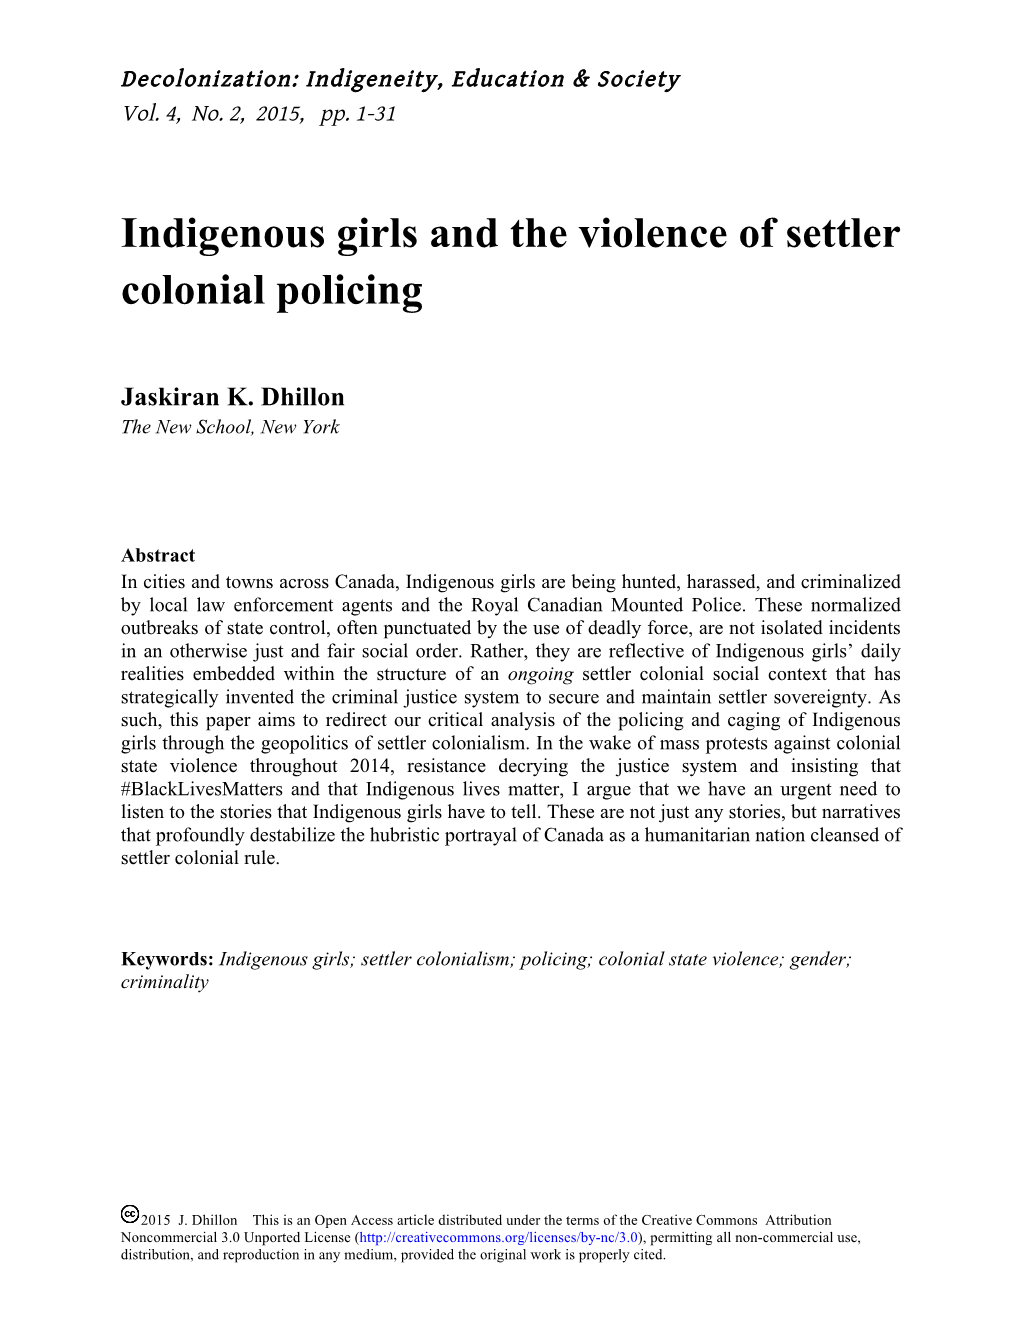 Indigenous Girls and the Violence of Settler Colonial Policing